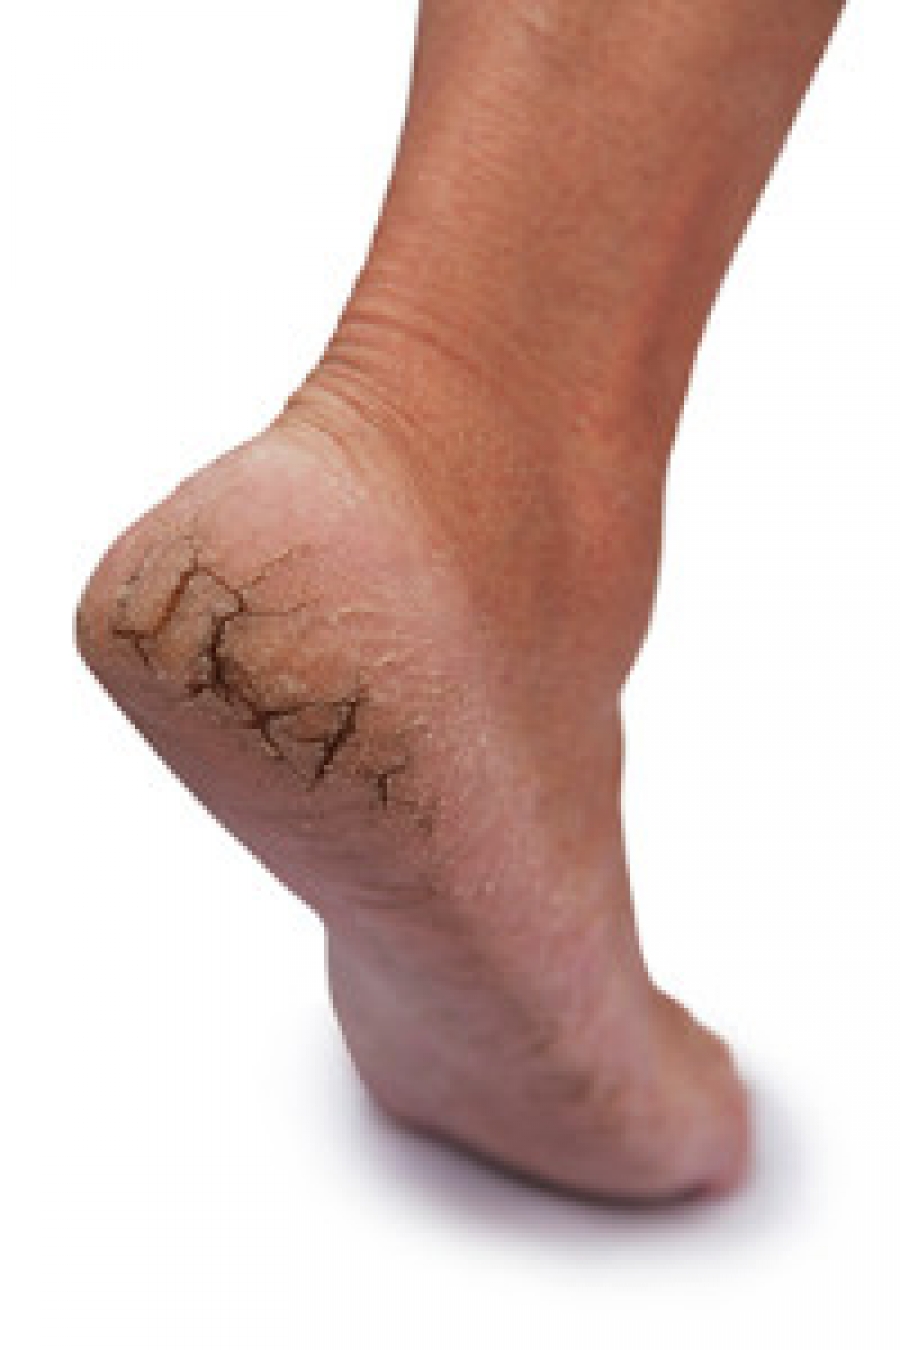 What Do I Do About Cracked Feet?